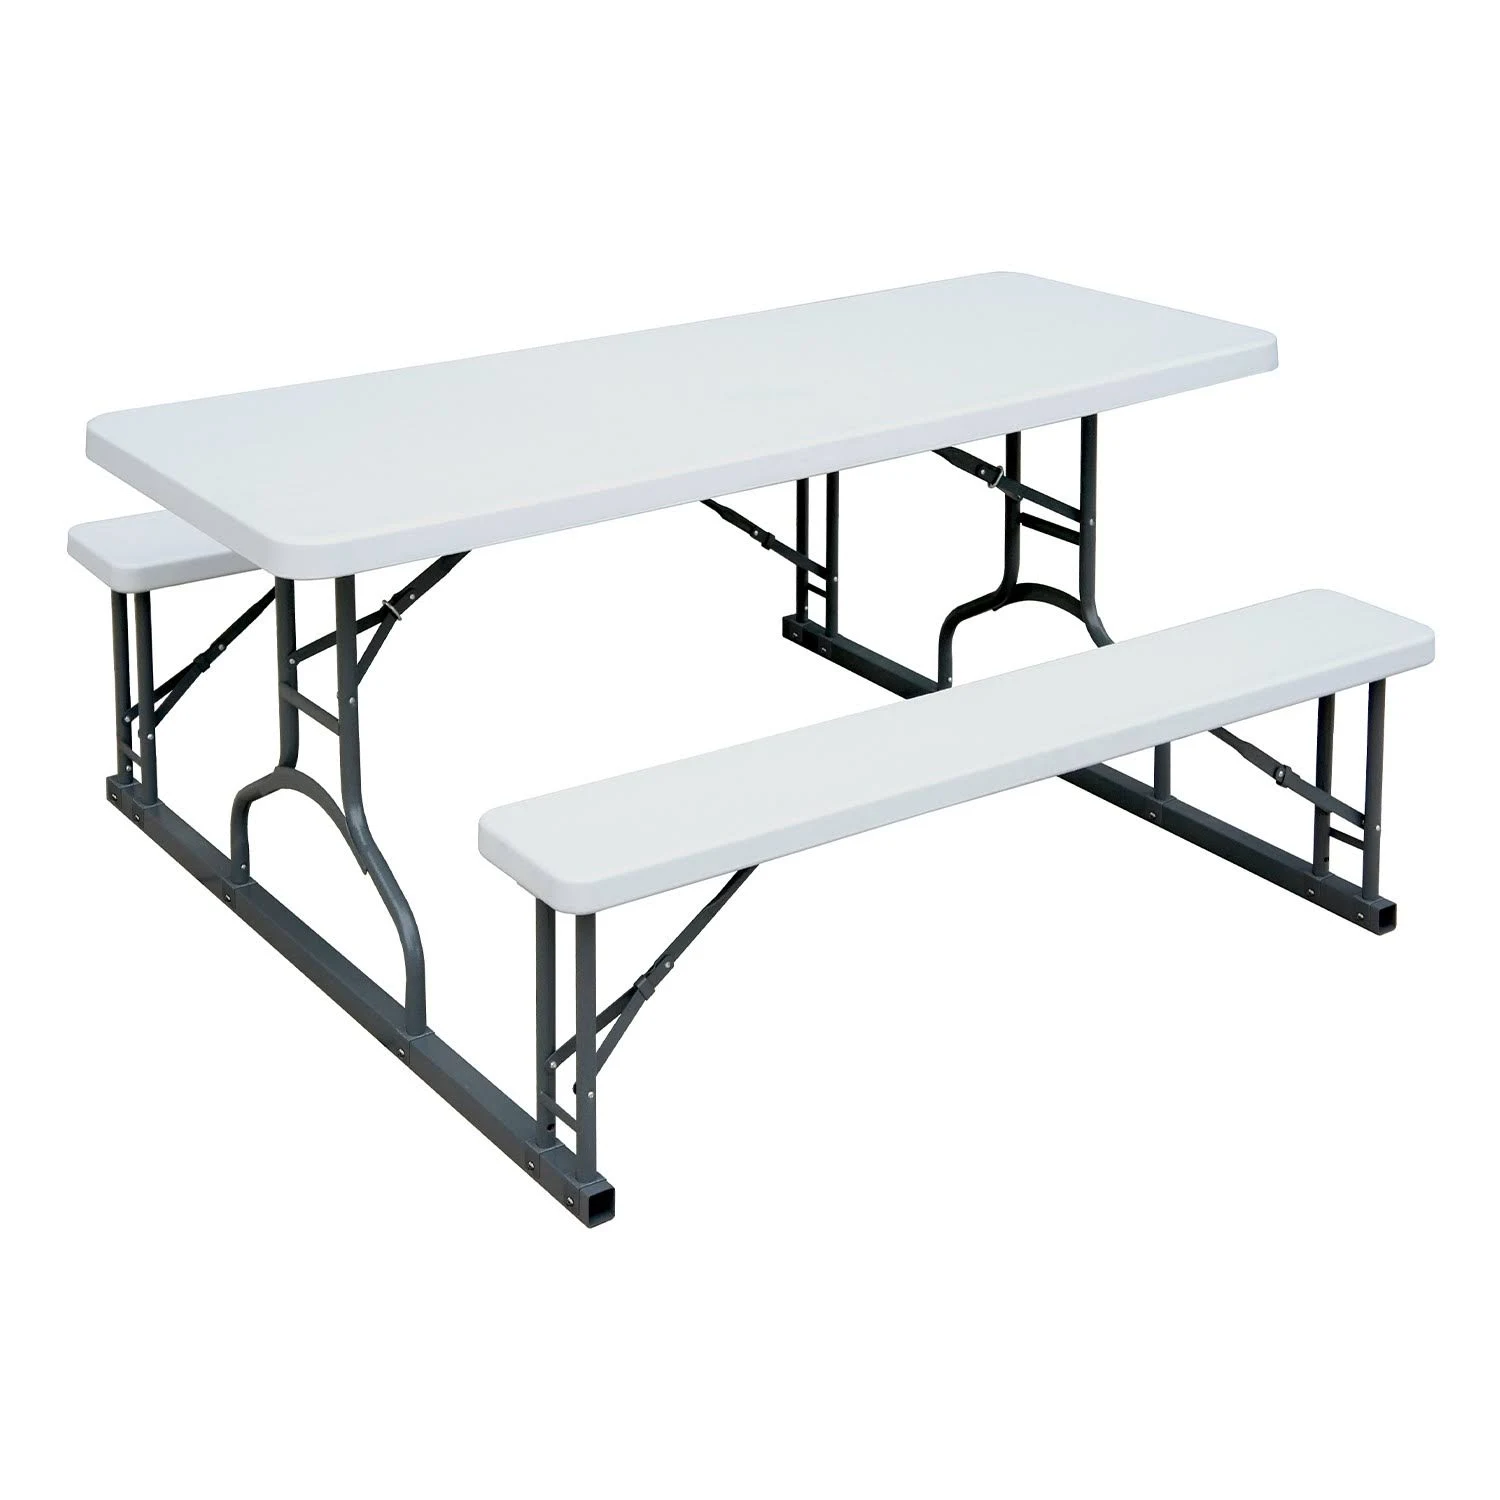 Plastic Development Group PIC345 6′ Picnic Outdoor Table with Bench  C White